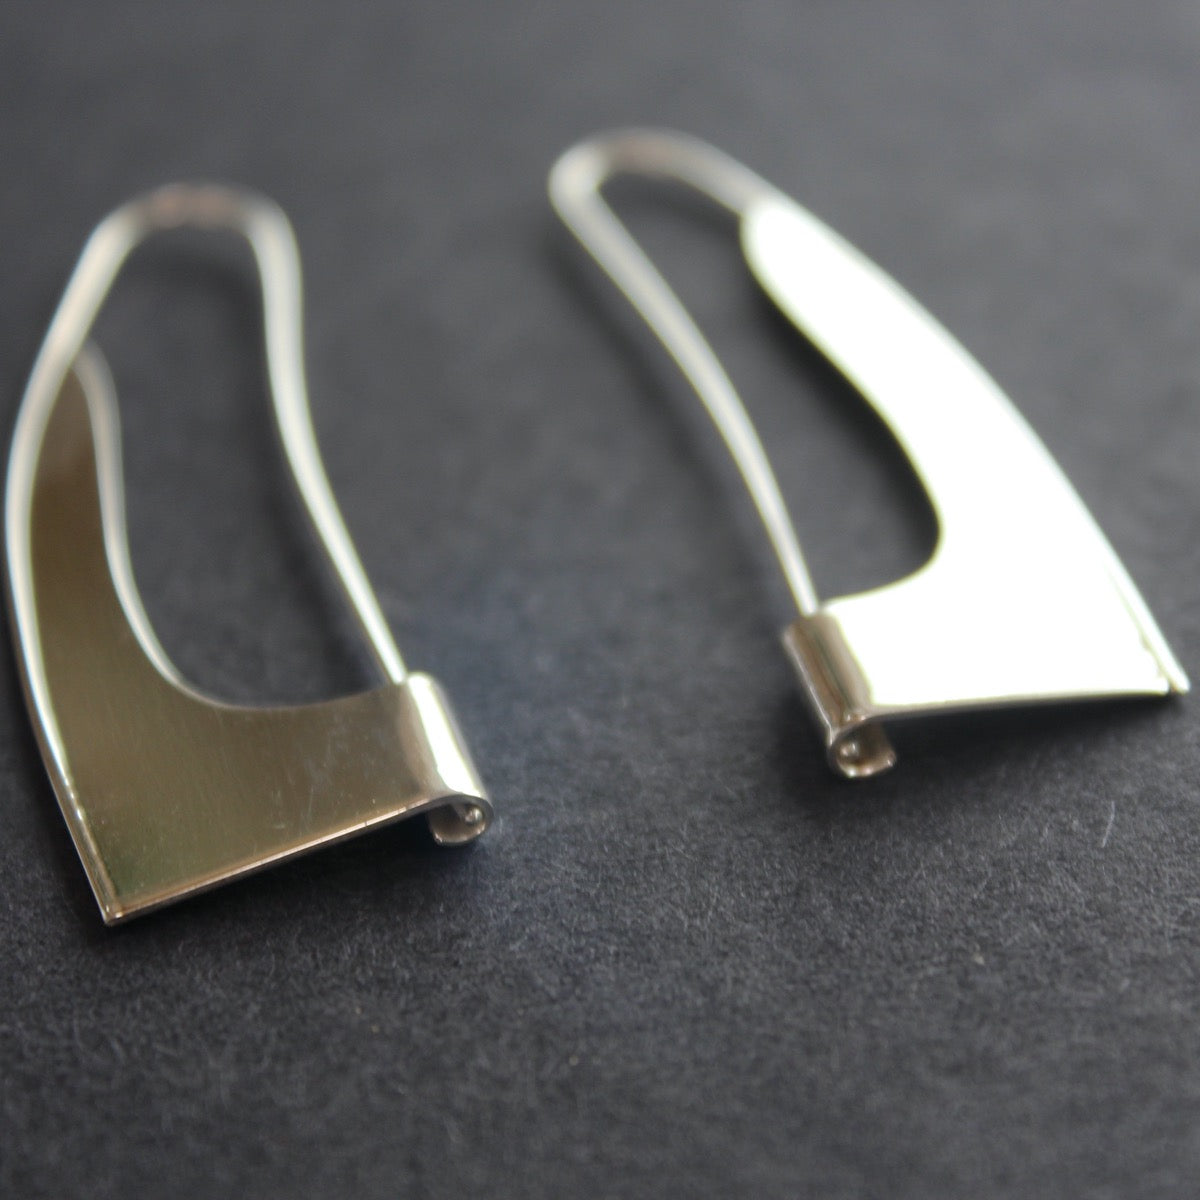 curved silver earrings in the shape of a sail